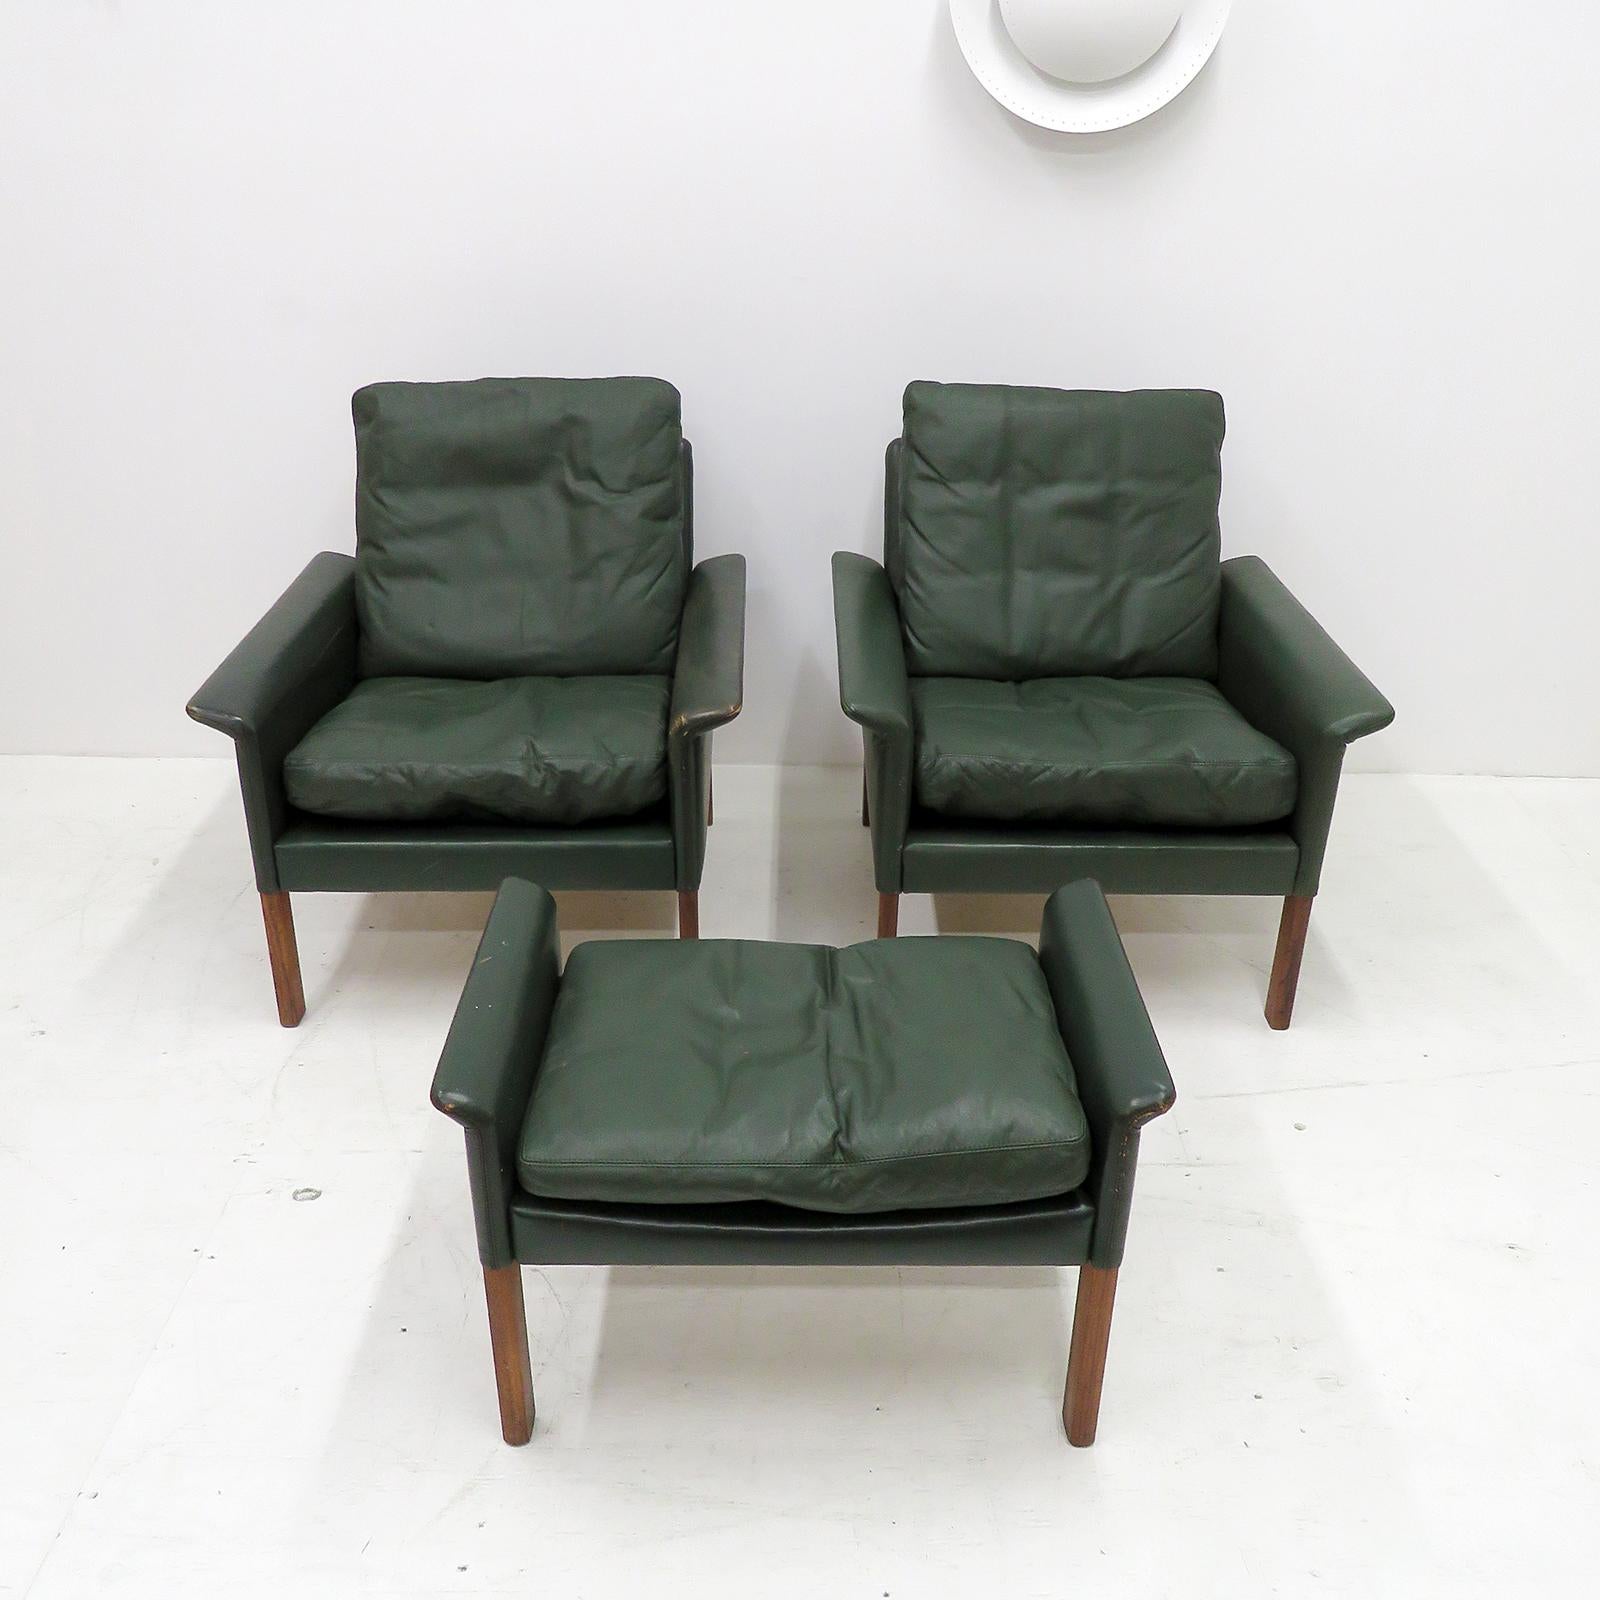 pair of stunning green leather armchairs and ottoman by Hans Olsen, fluted arms upholstered in leather, original soft leather upholstery with loose feather down cushions on rosewood legs